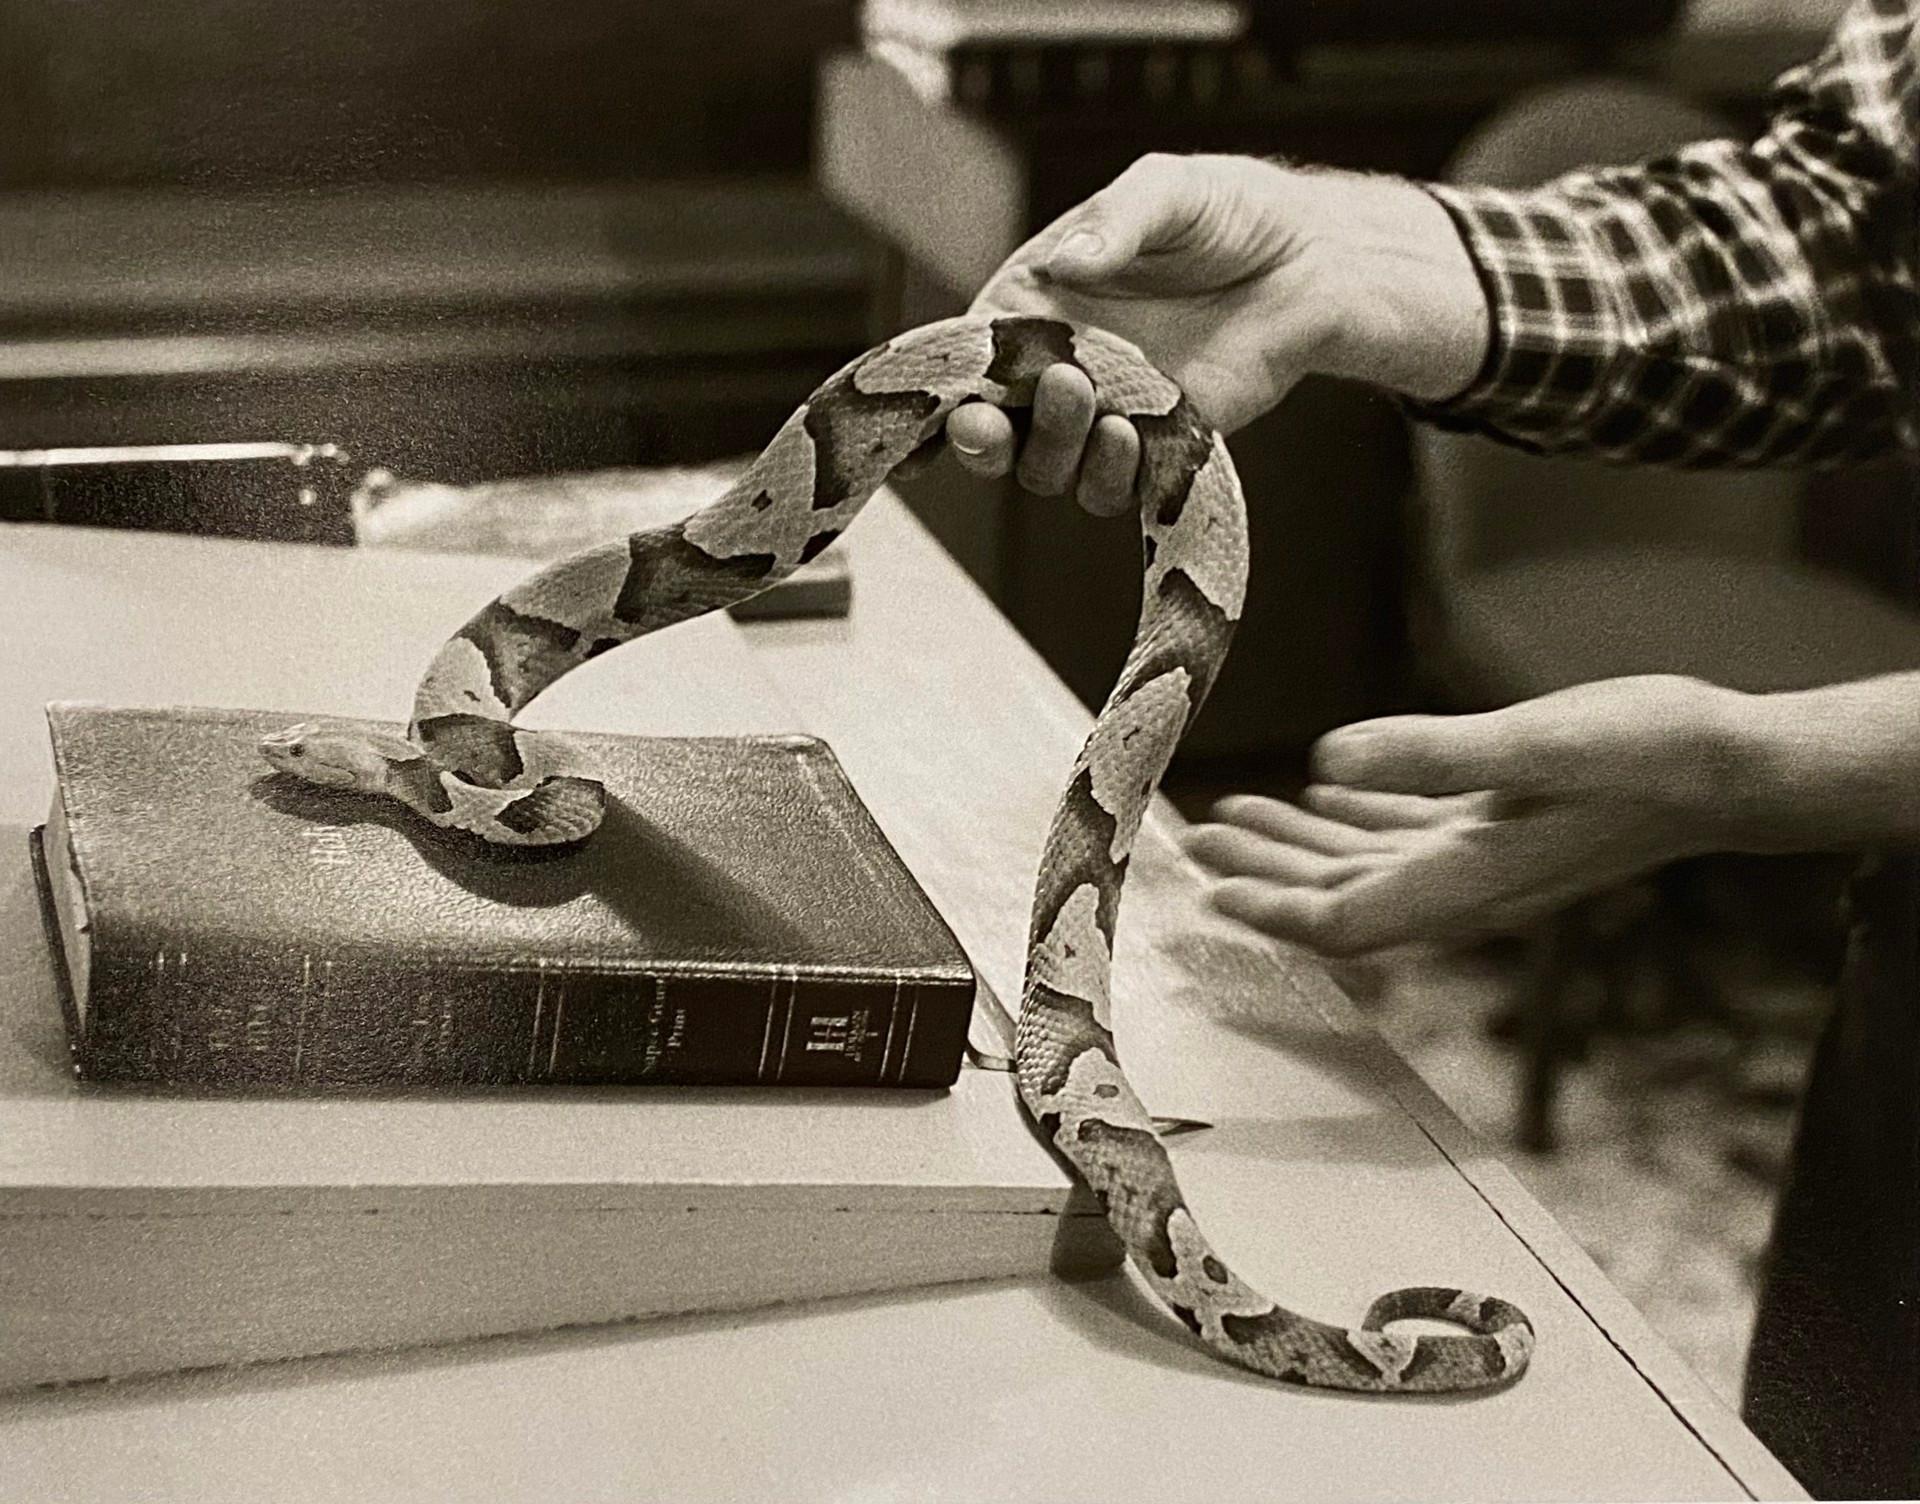 Serpent on The Bible